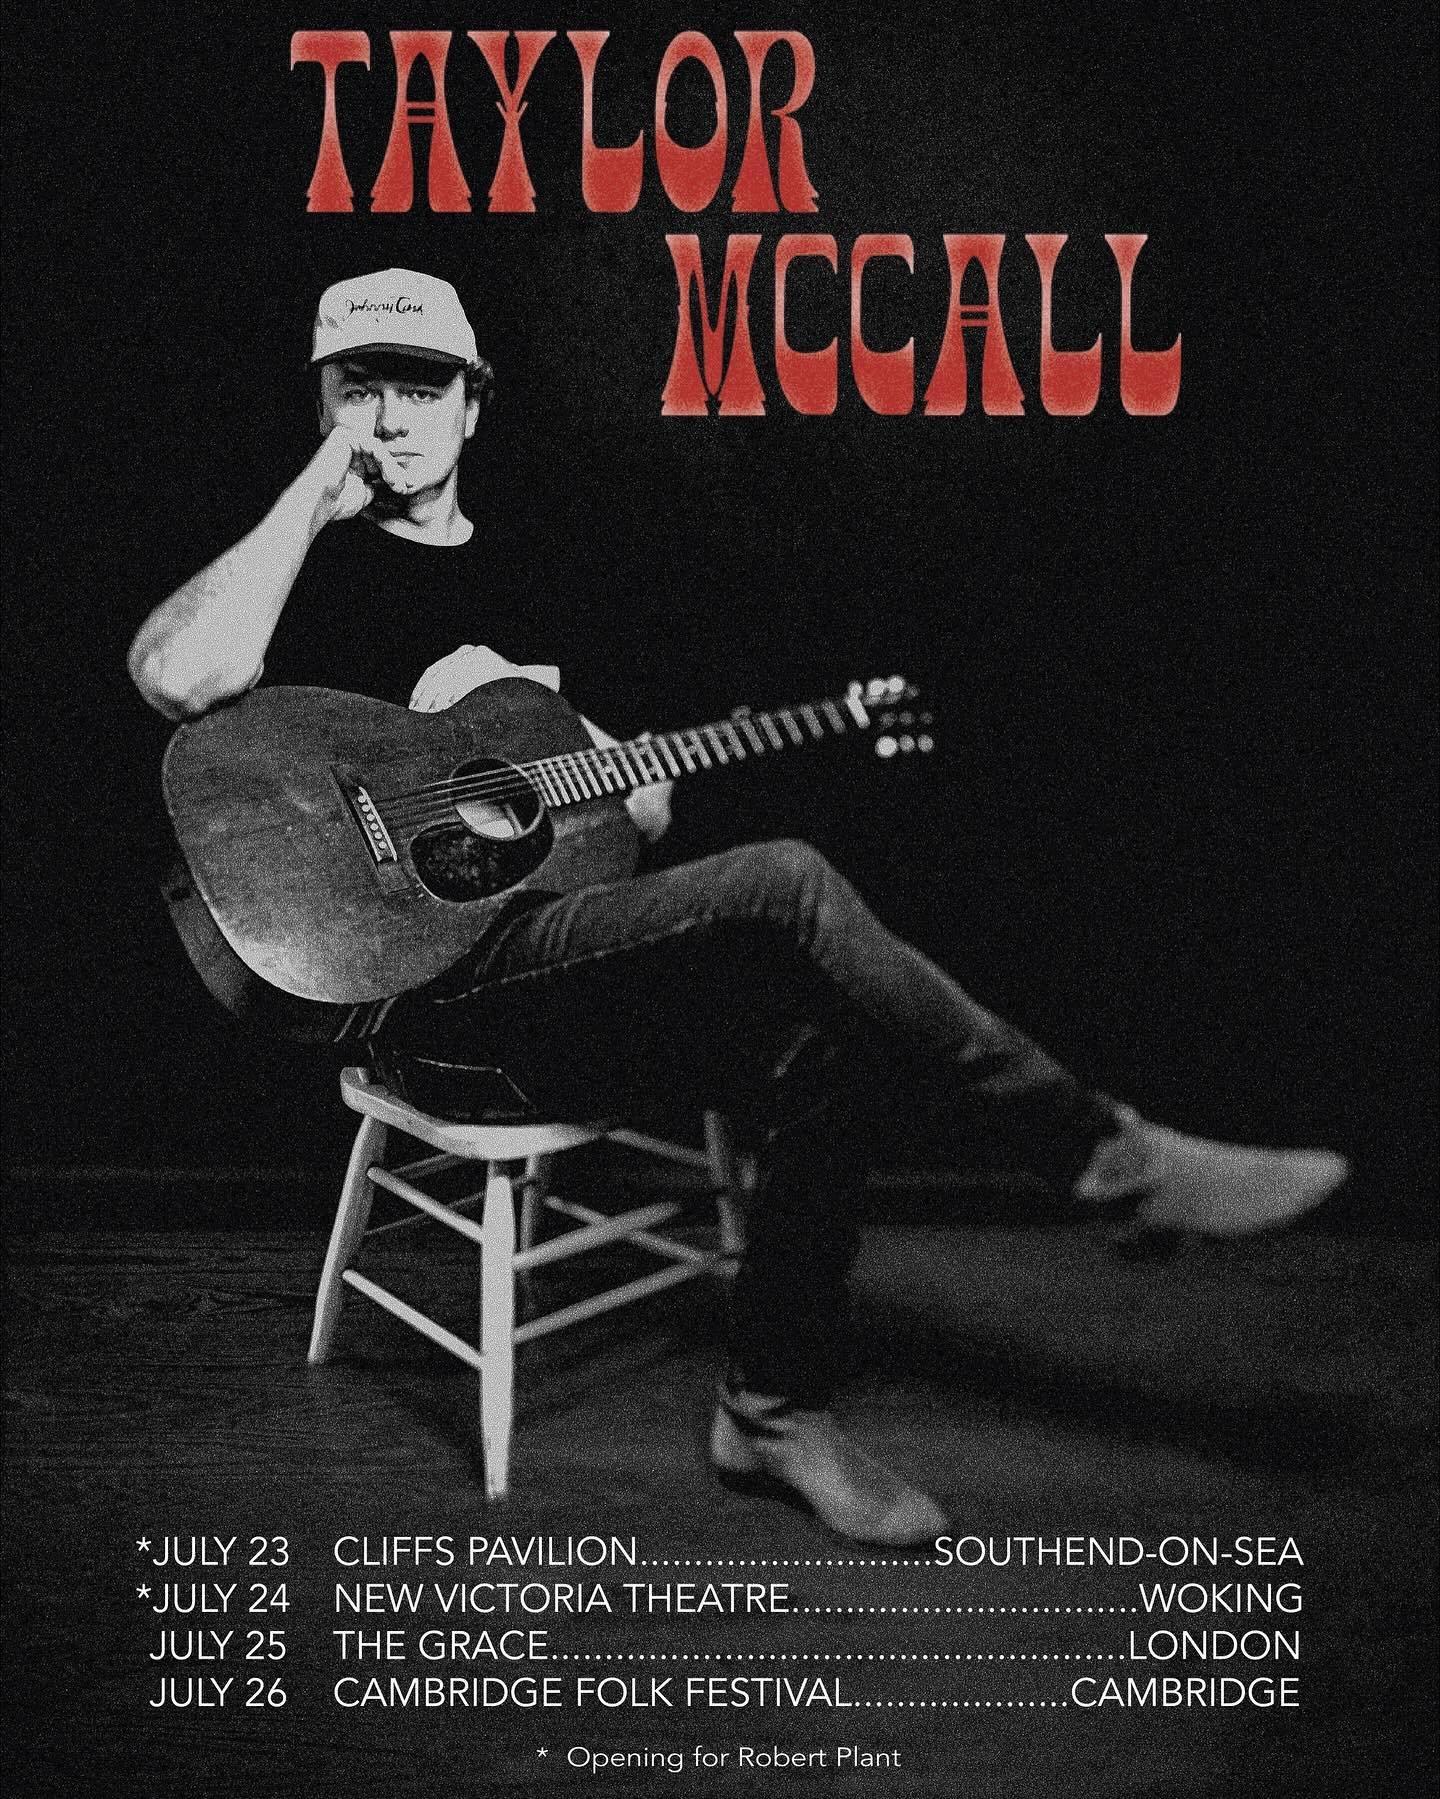 NEW SHOW JUST ADDED! We&rsquo;re getting closer to our return to the UK&hellip; I&rsquo;ve added another solo show on July 25 at @thegraceldn! Can&rsquo;t wait to see y&rsquo;all there. 🤘

Grab your tickets @ taylormccall.com